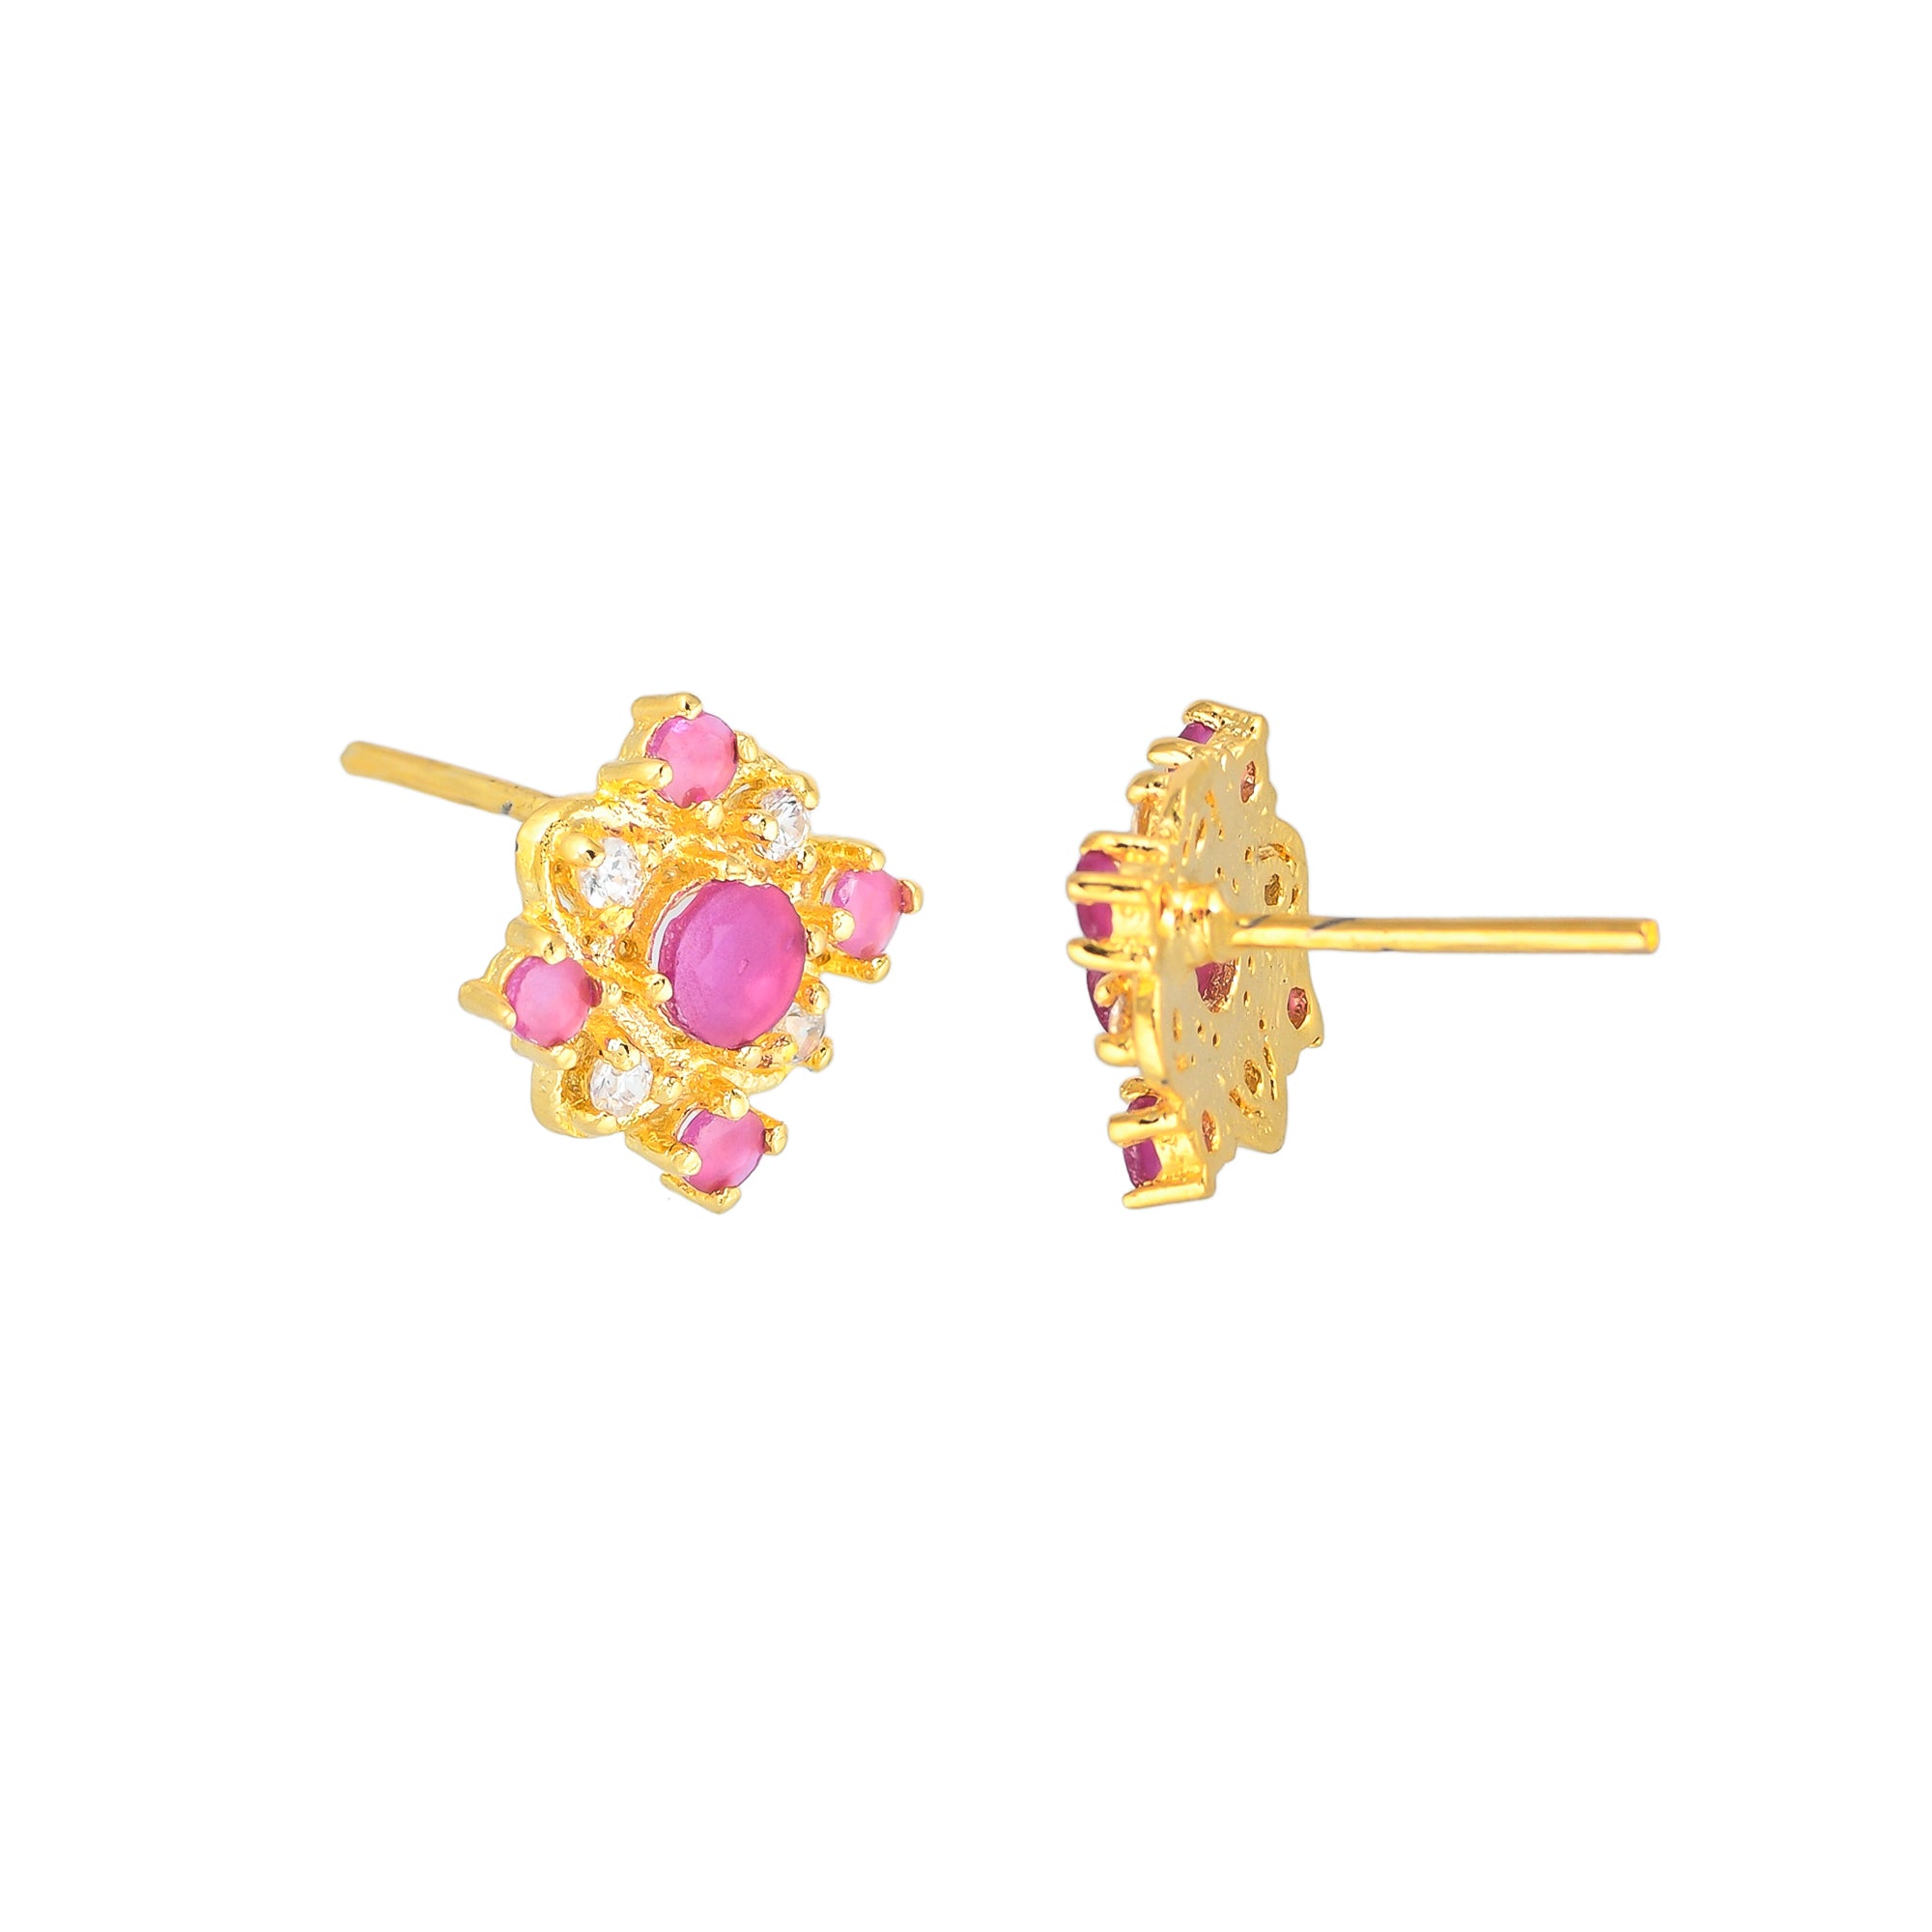 Sparkling Essentials White and Pink CZ Gems Stud Earrings